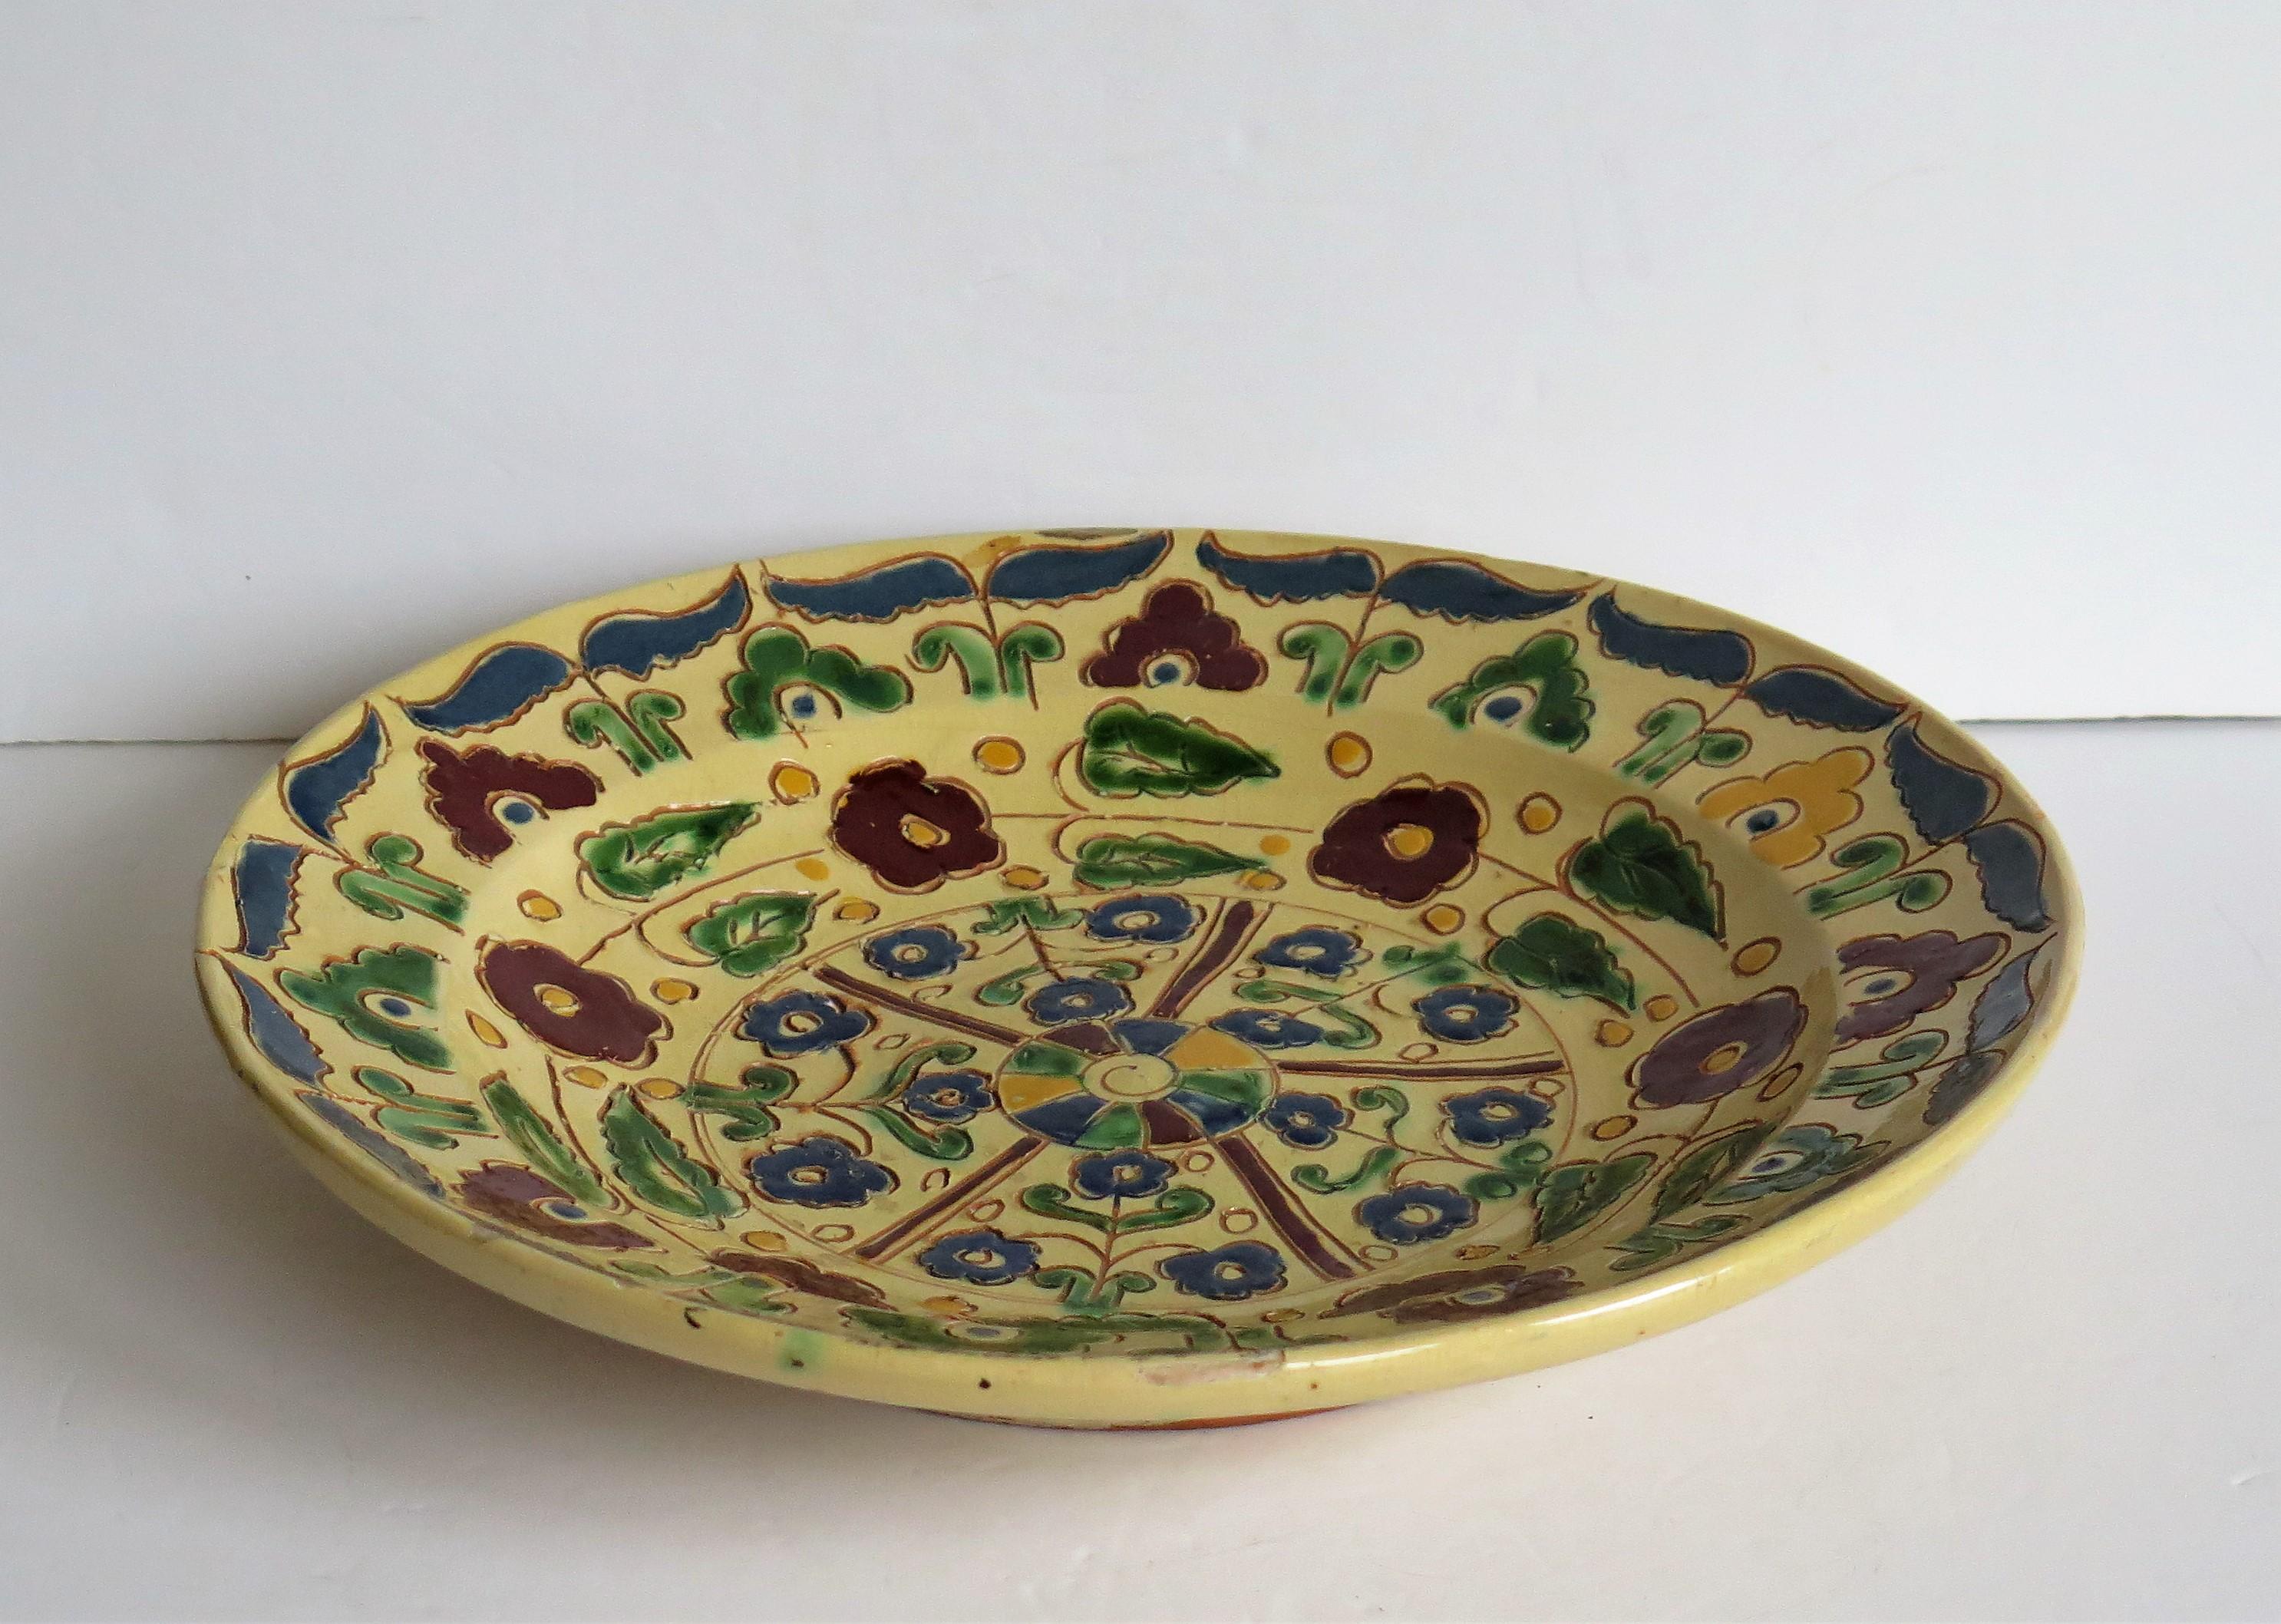 Earthenware Rare Sgraffito Redware Slip Decorated Pottery Charger Large Plate, 19th Century For Sale